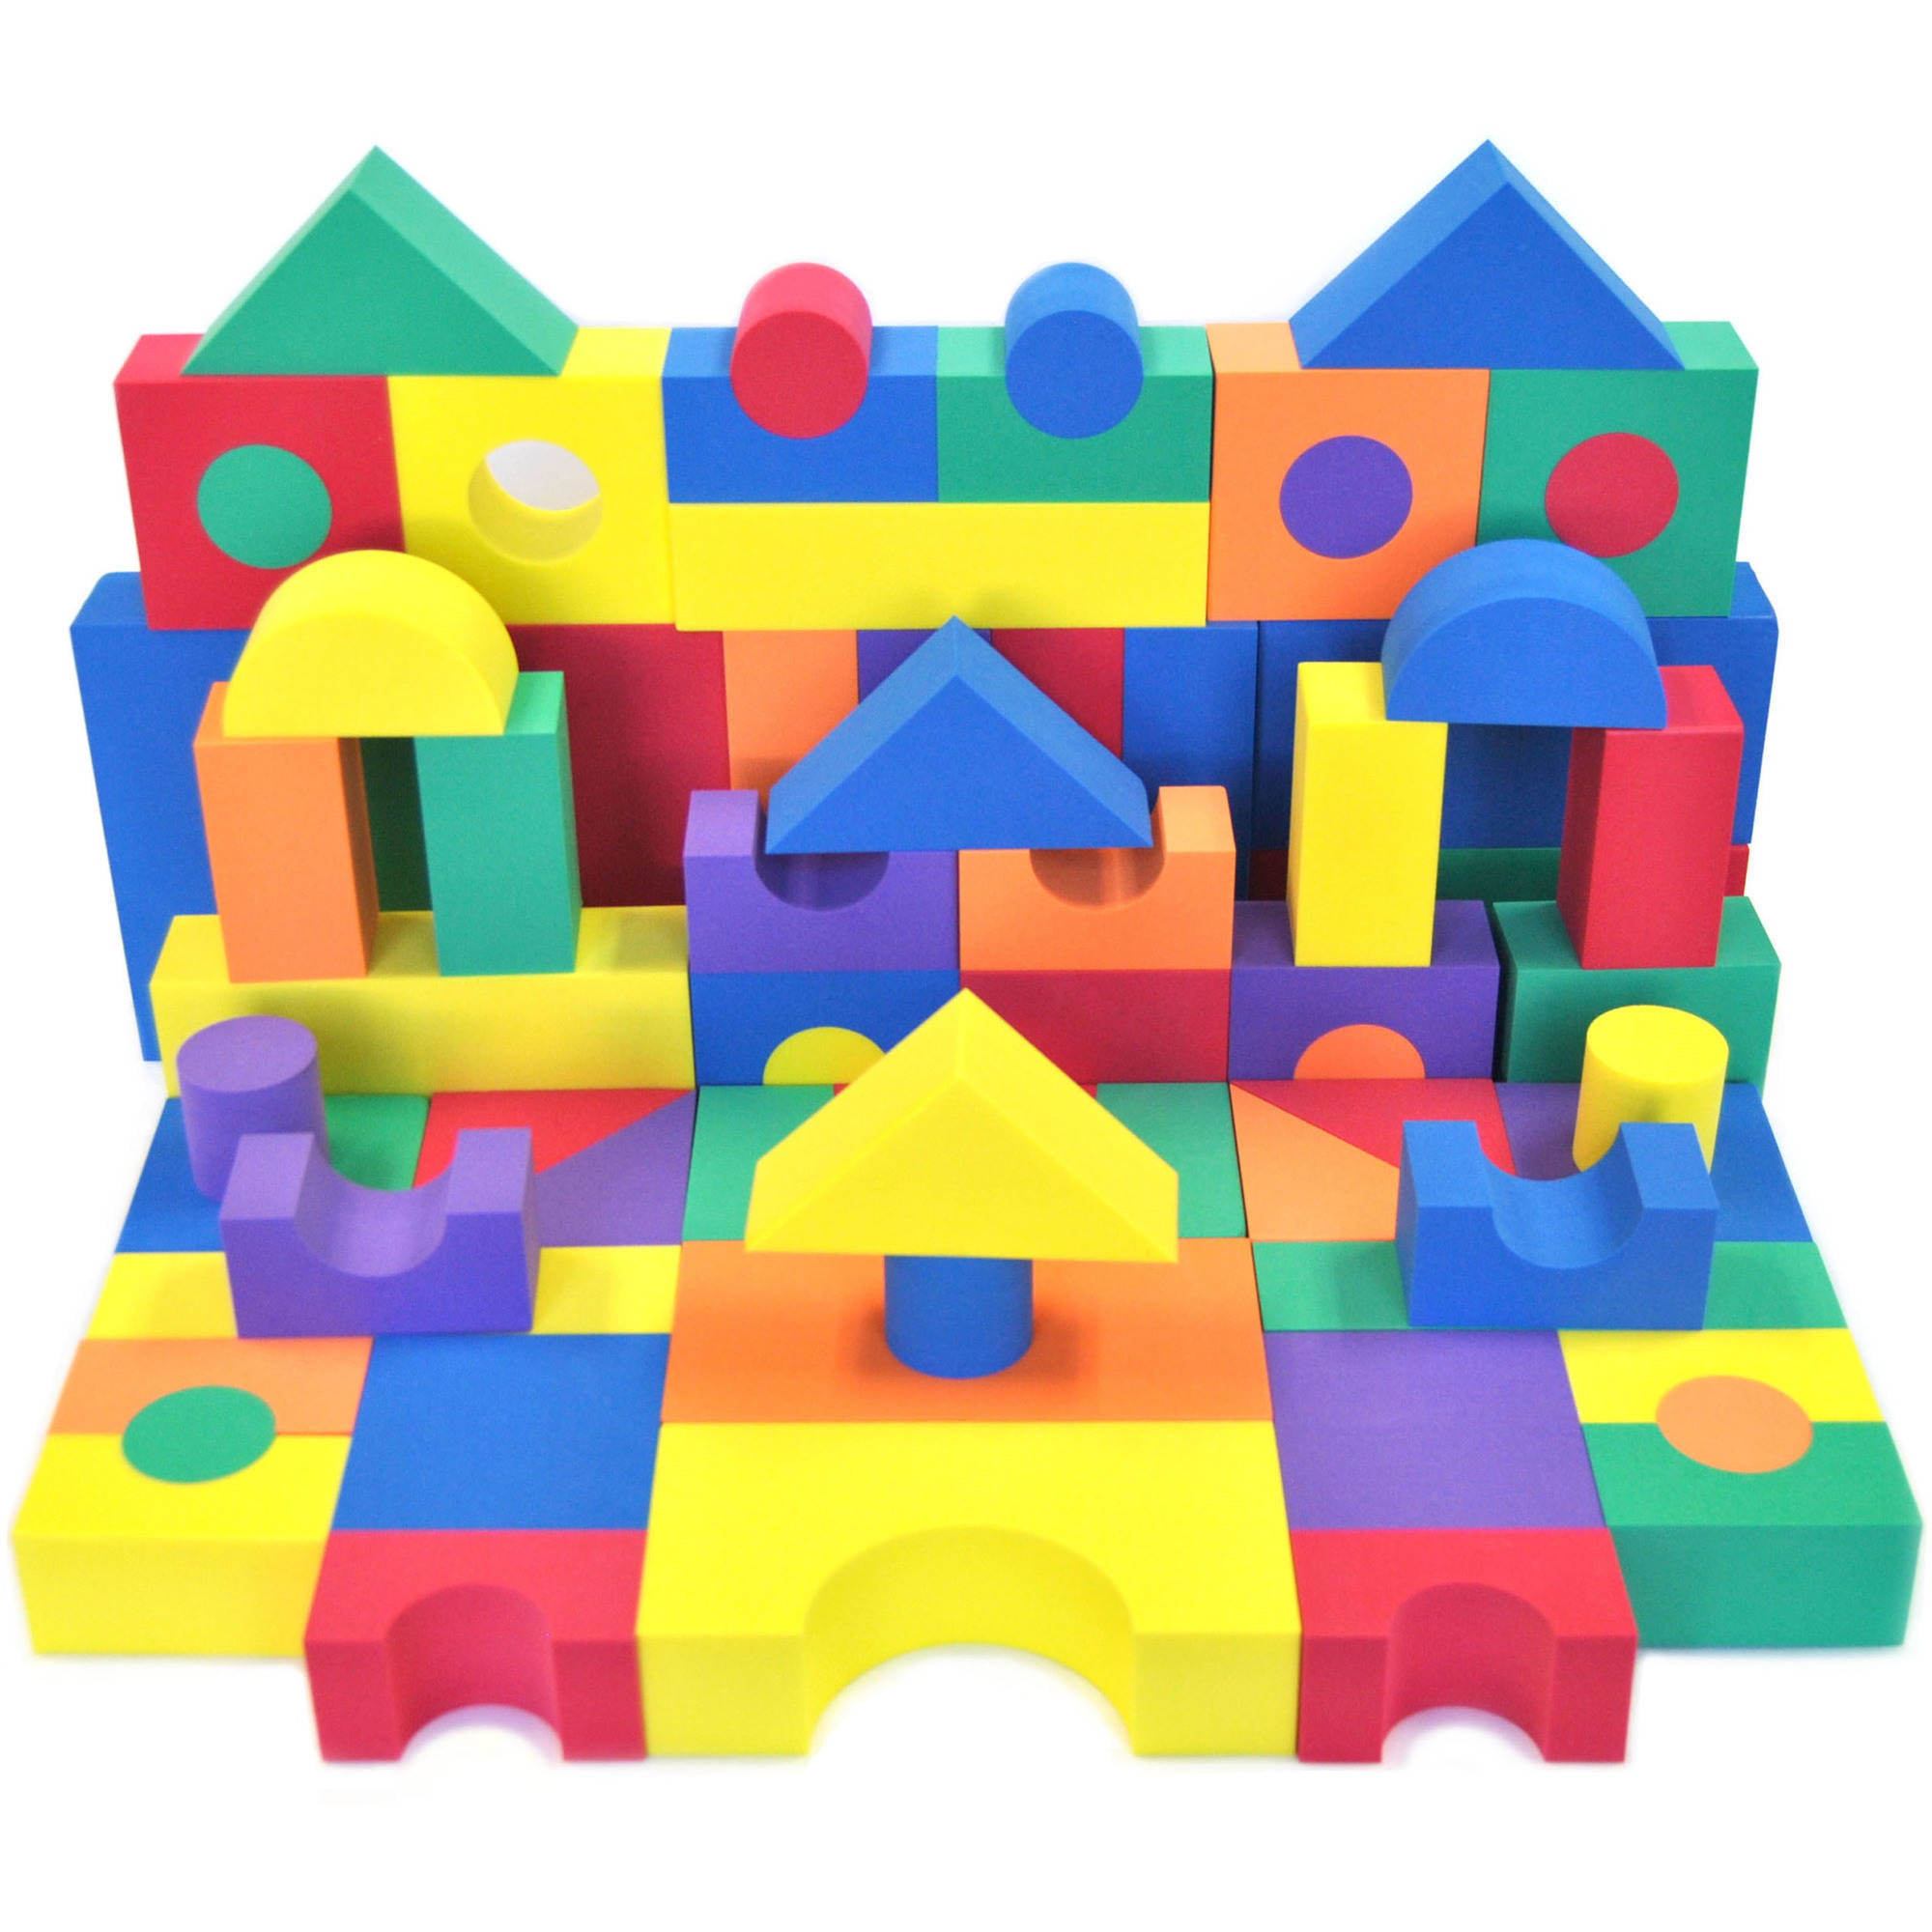 70 Piece Non-Toxic Non-Recycled Quality Soft Foam Wonder Blocks for Children 